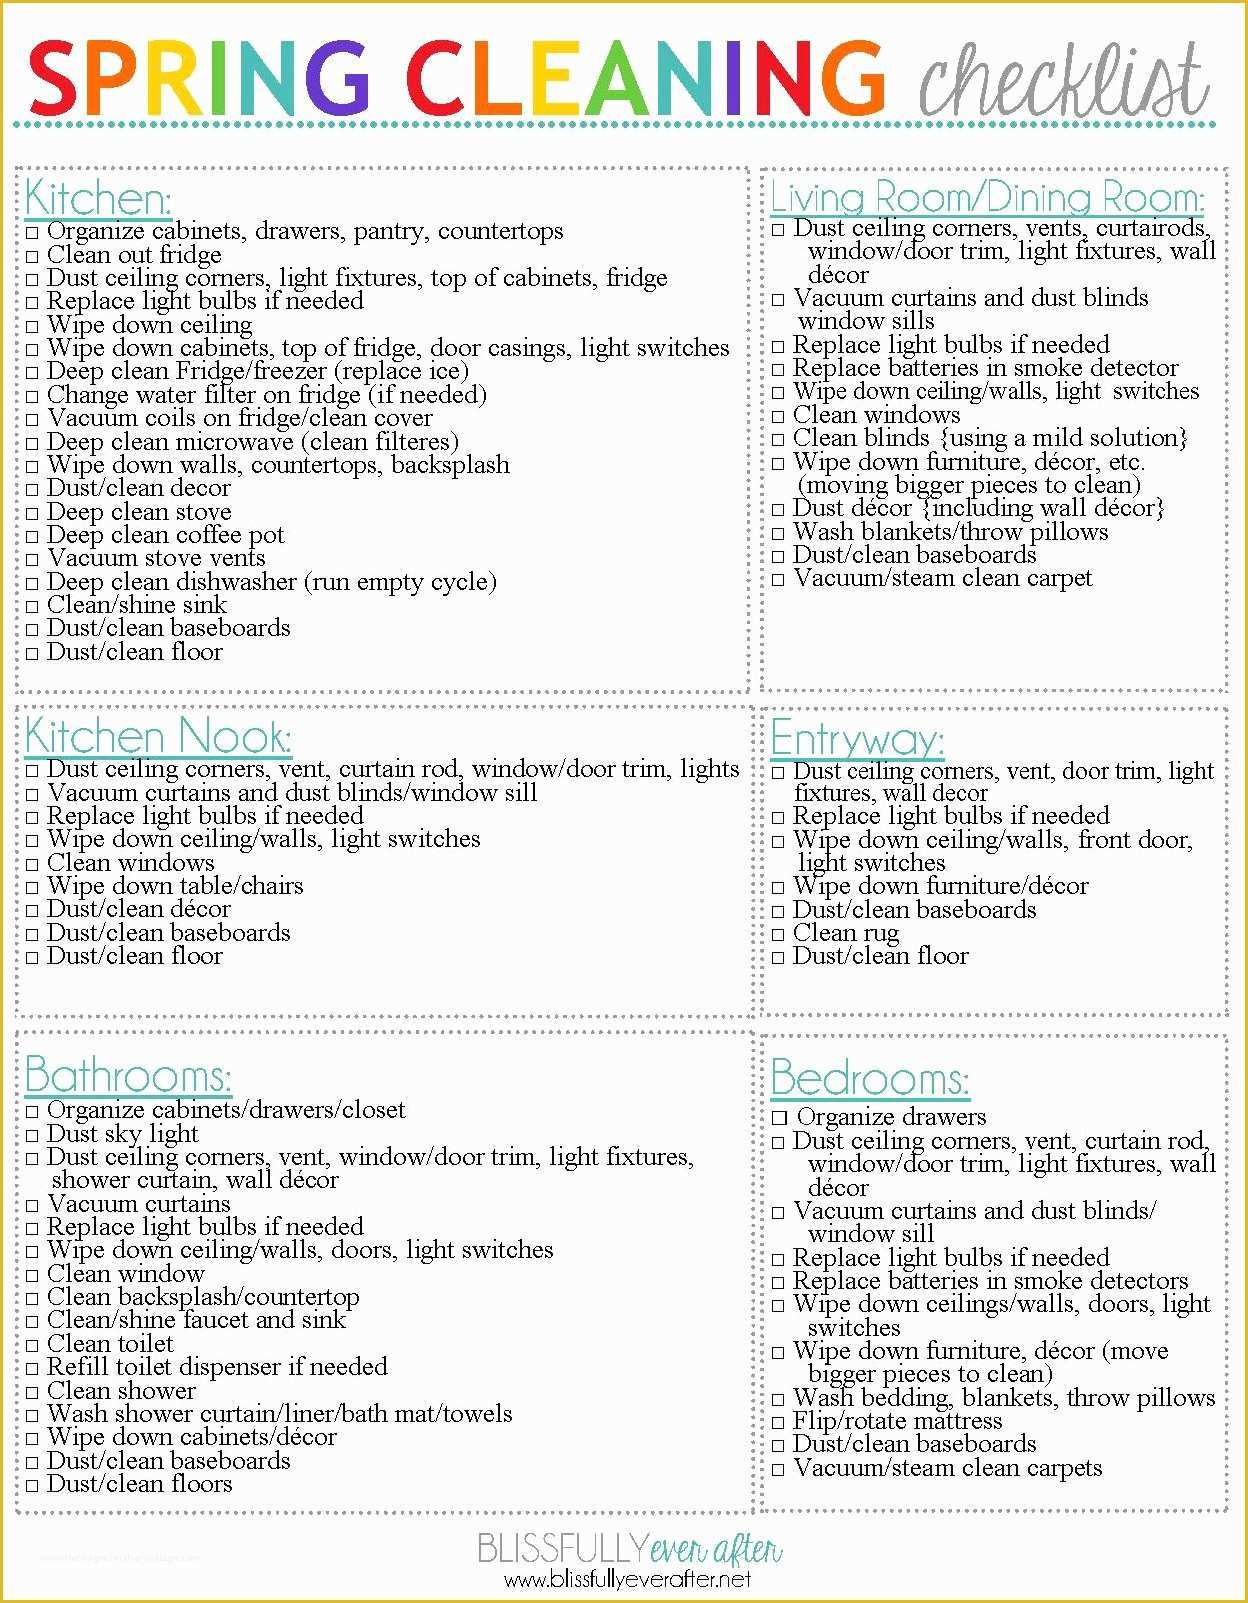 Free Printable Cleaning Checklist Template Of Spring Cleaning Checklist